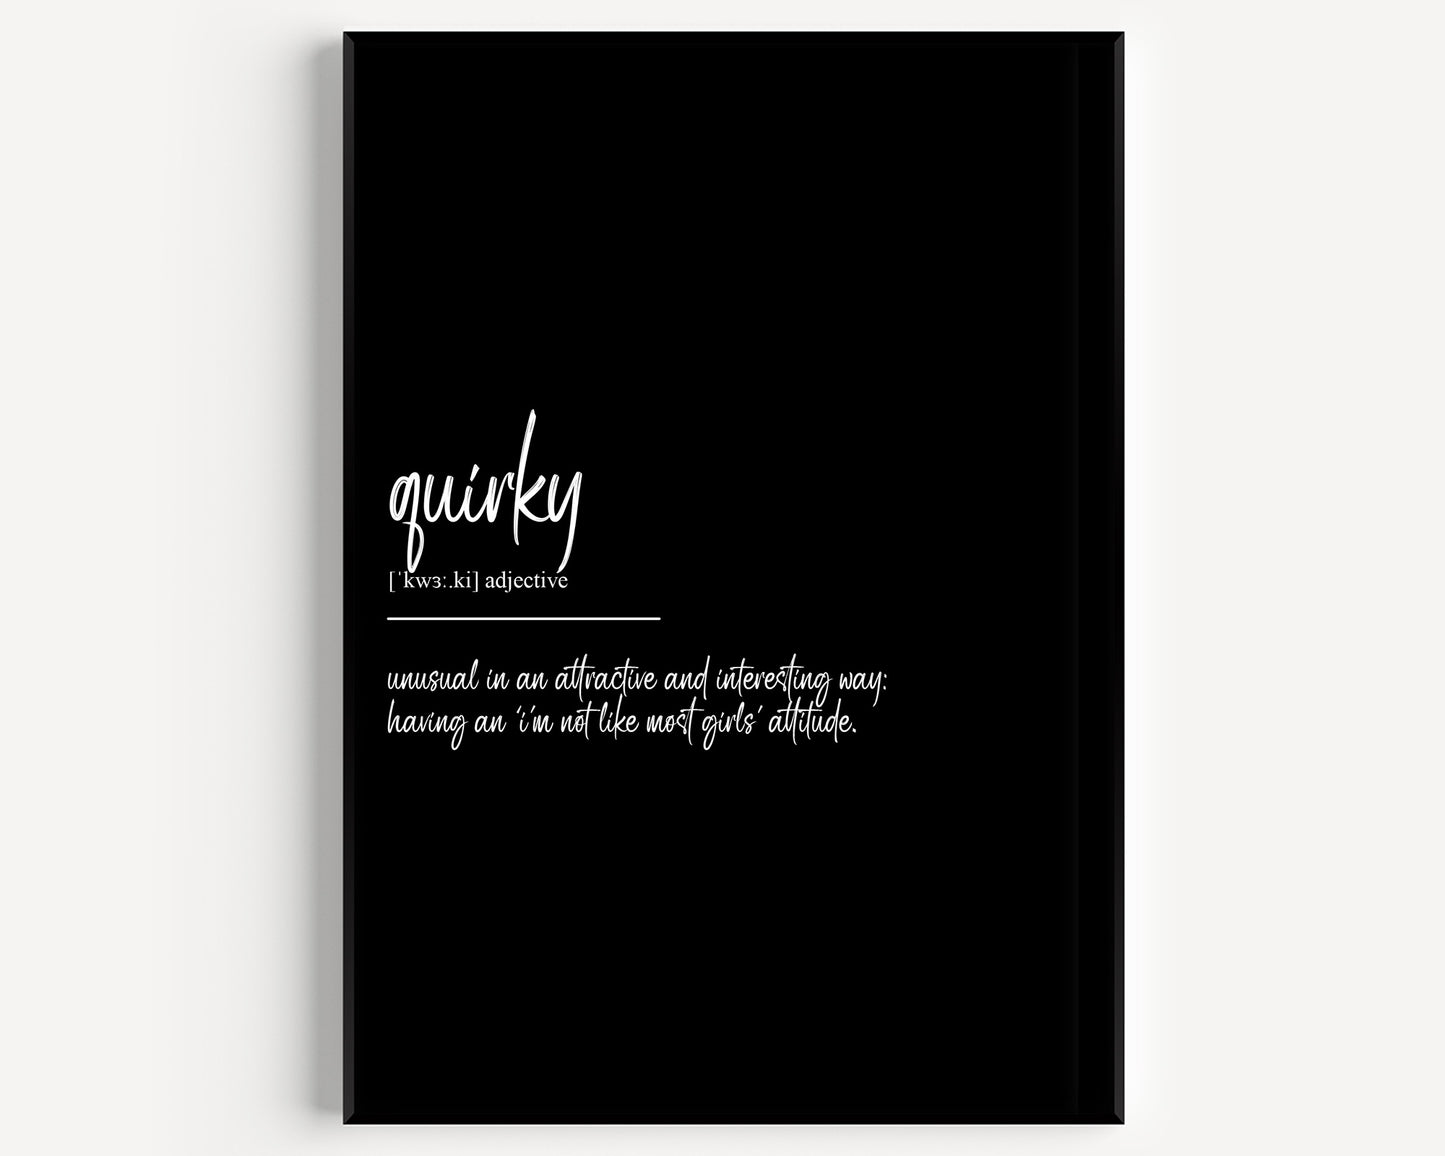 Quirky Definition Print - Magic Posters